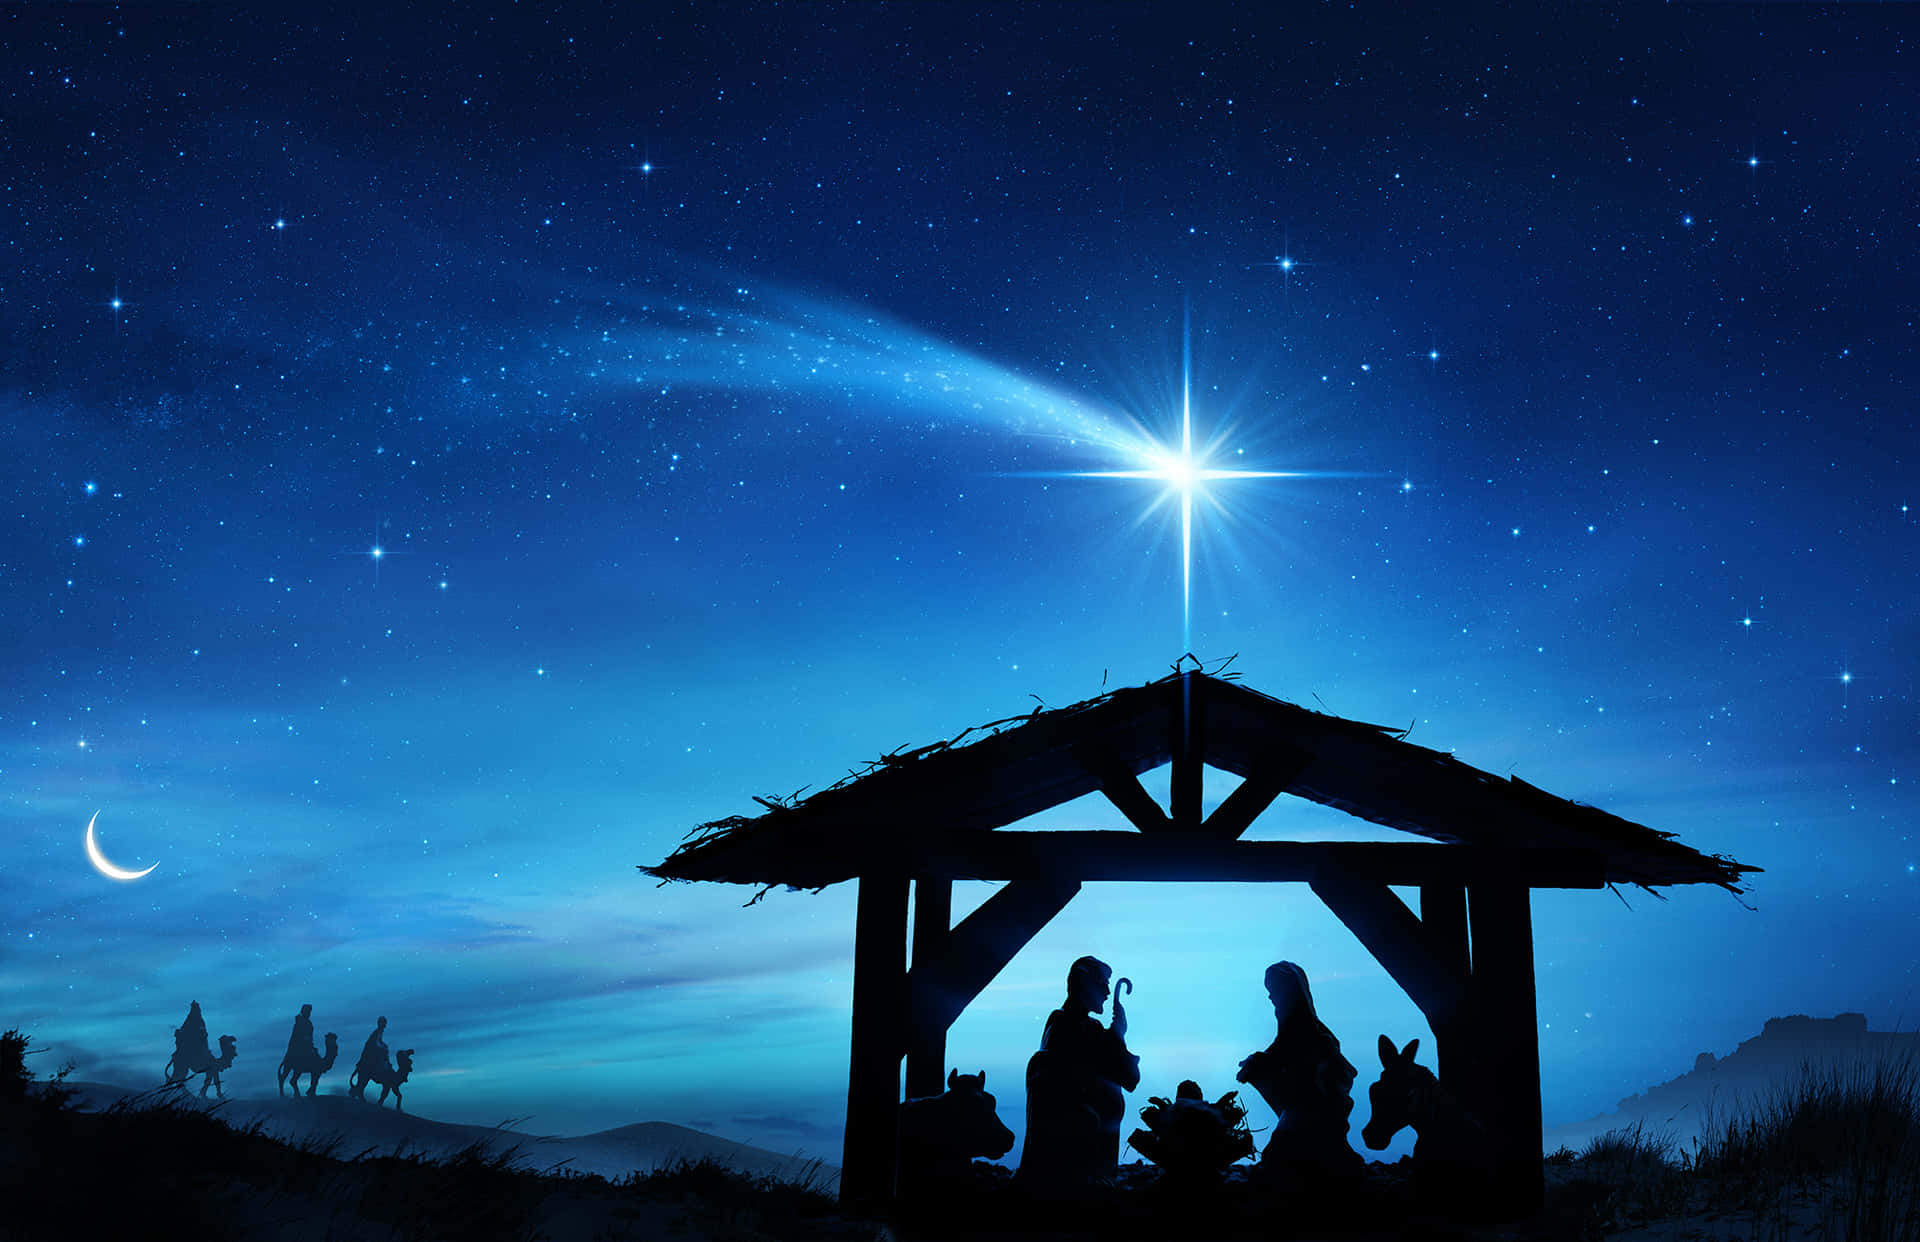 A Silhouette Of The Nativity Scene With The Star In The Sky